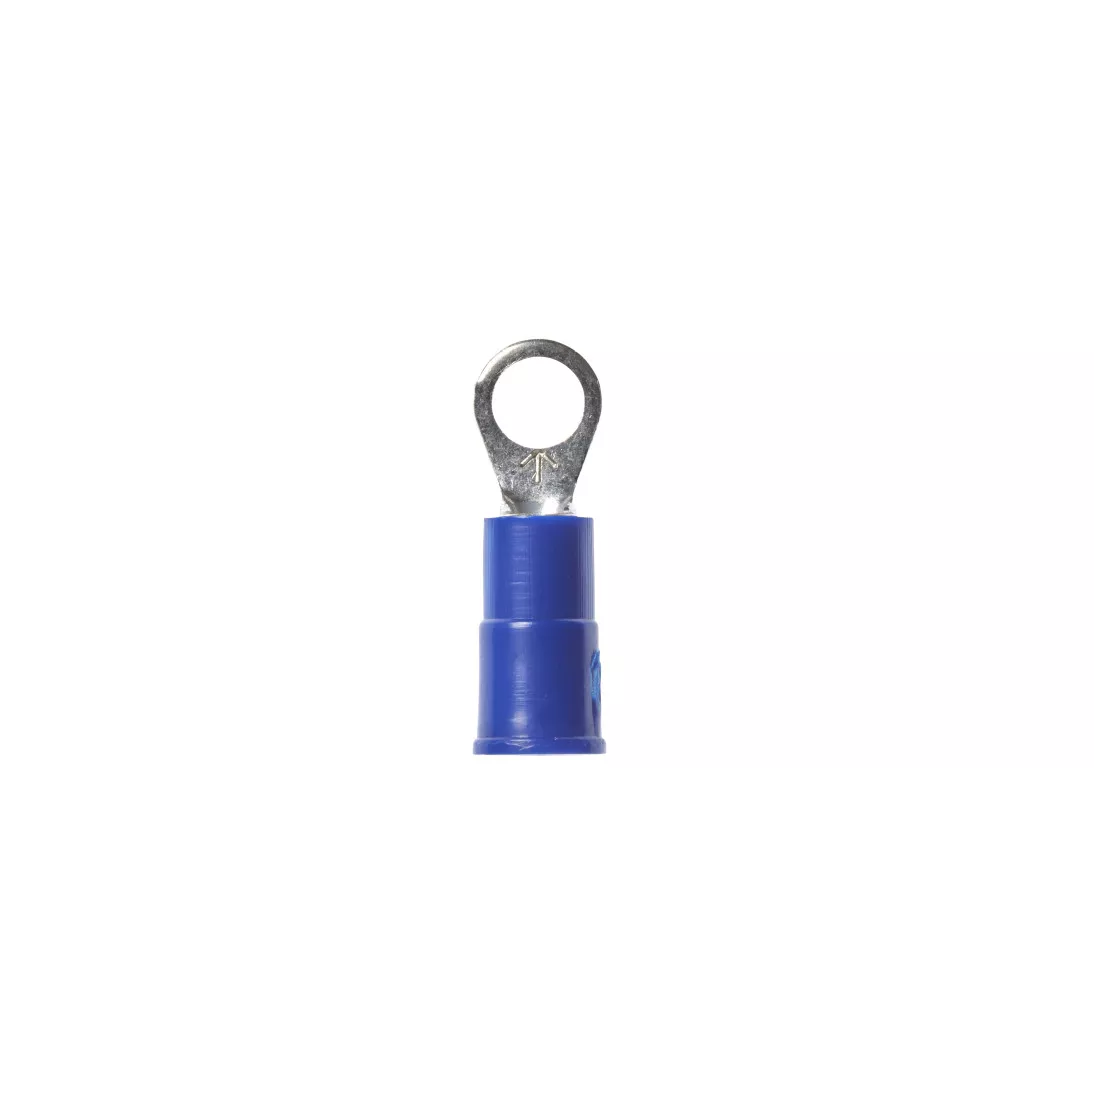 3M™ Scotchlok™ Ring Vinyl Insulated, 100/bottle, MVU14-8R/SX,
standard-style ring tongue fits around the stud, 500/Case